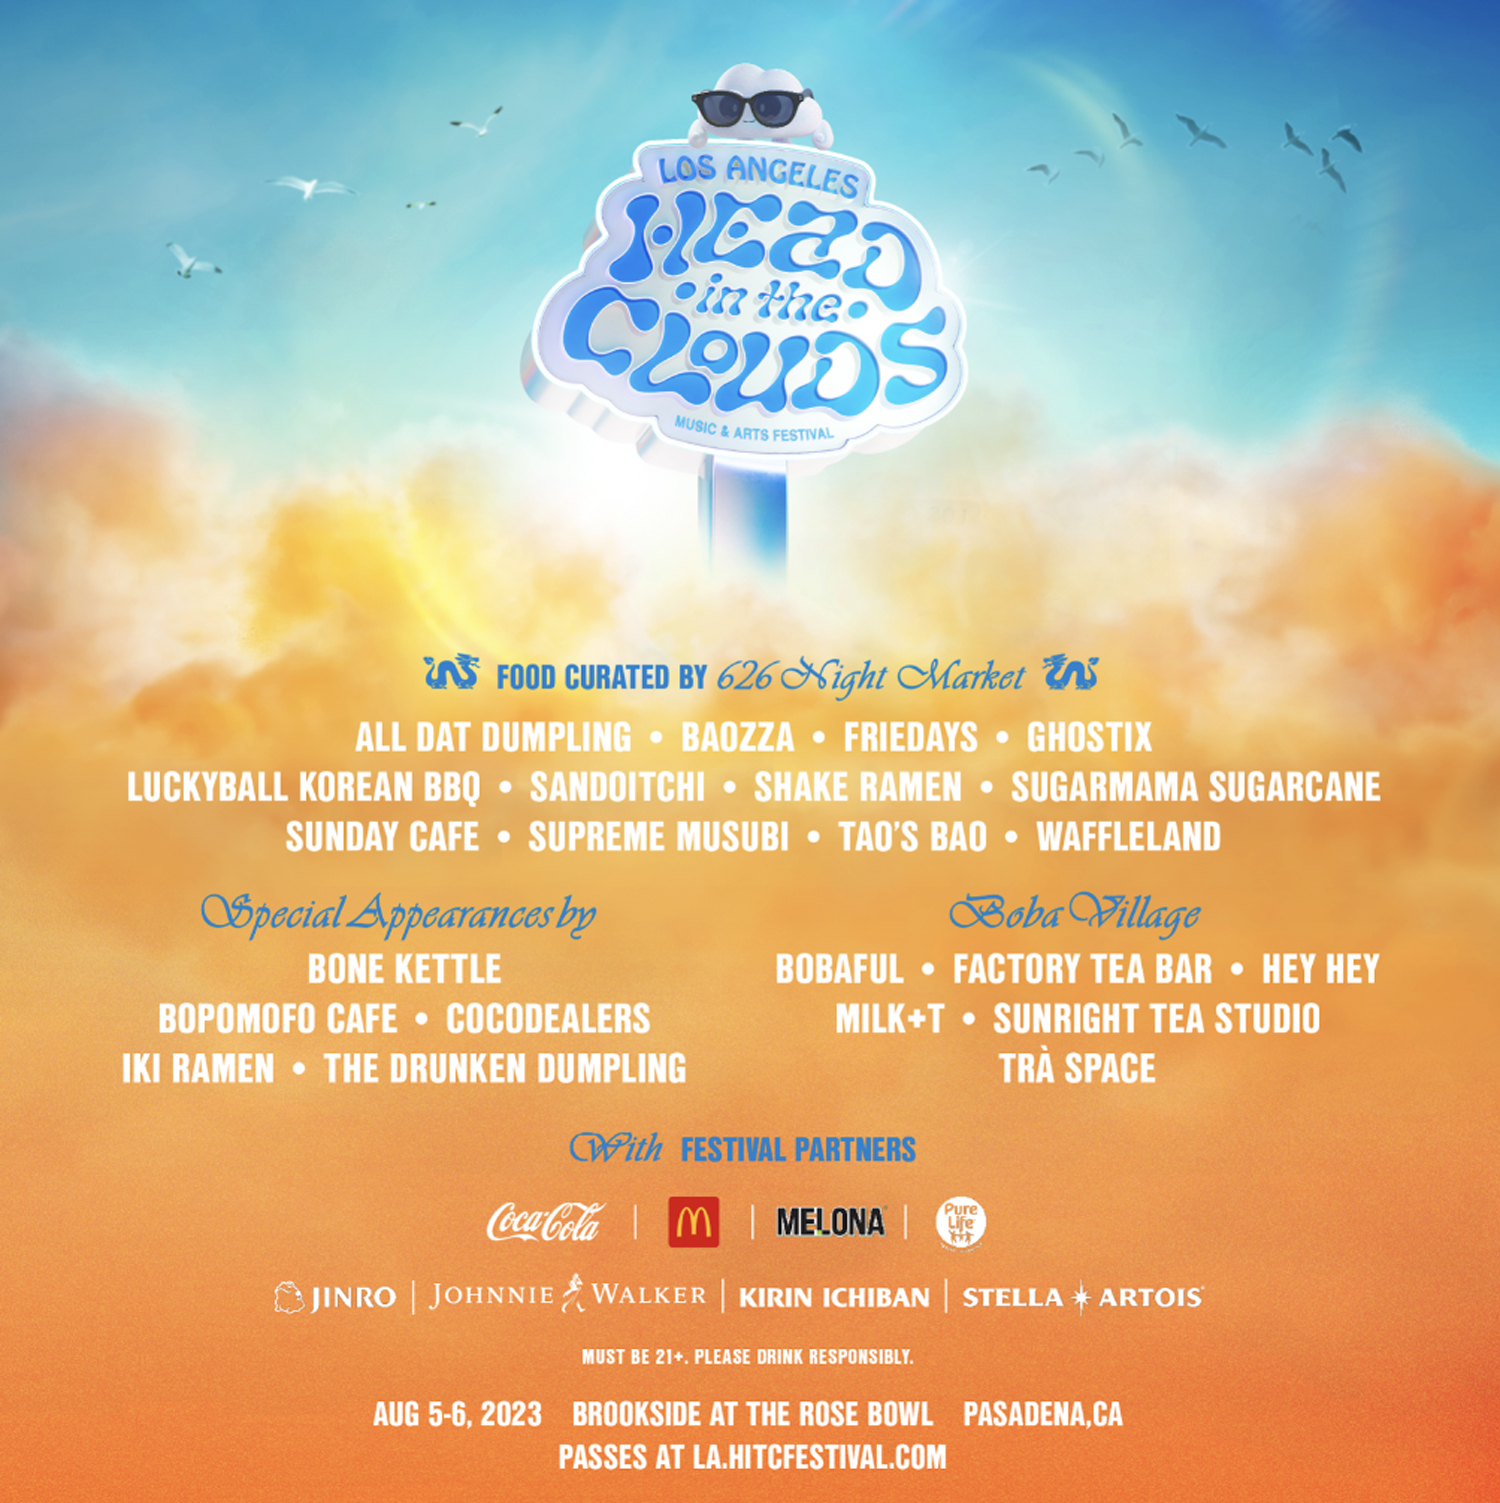 88rising's 2023 Head in the Clouds Festival Local Wolves